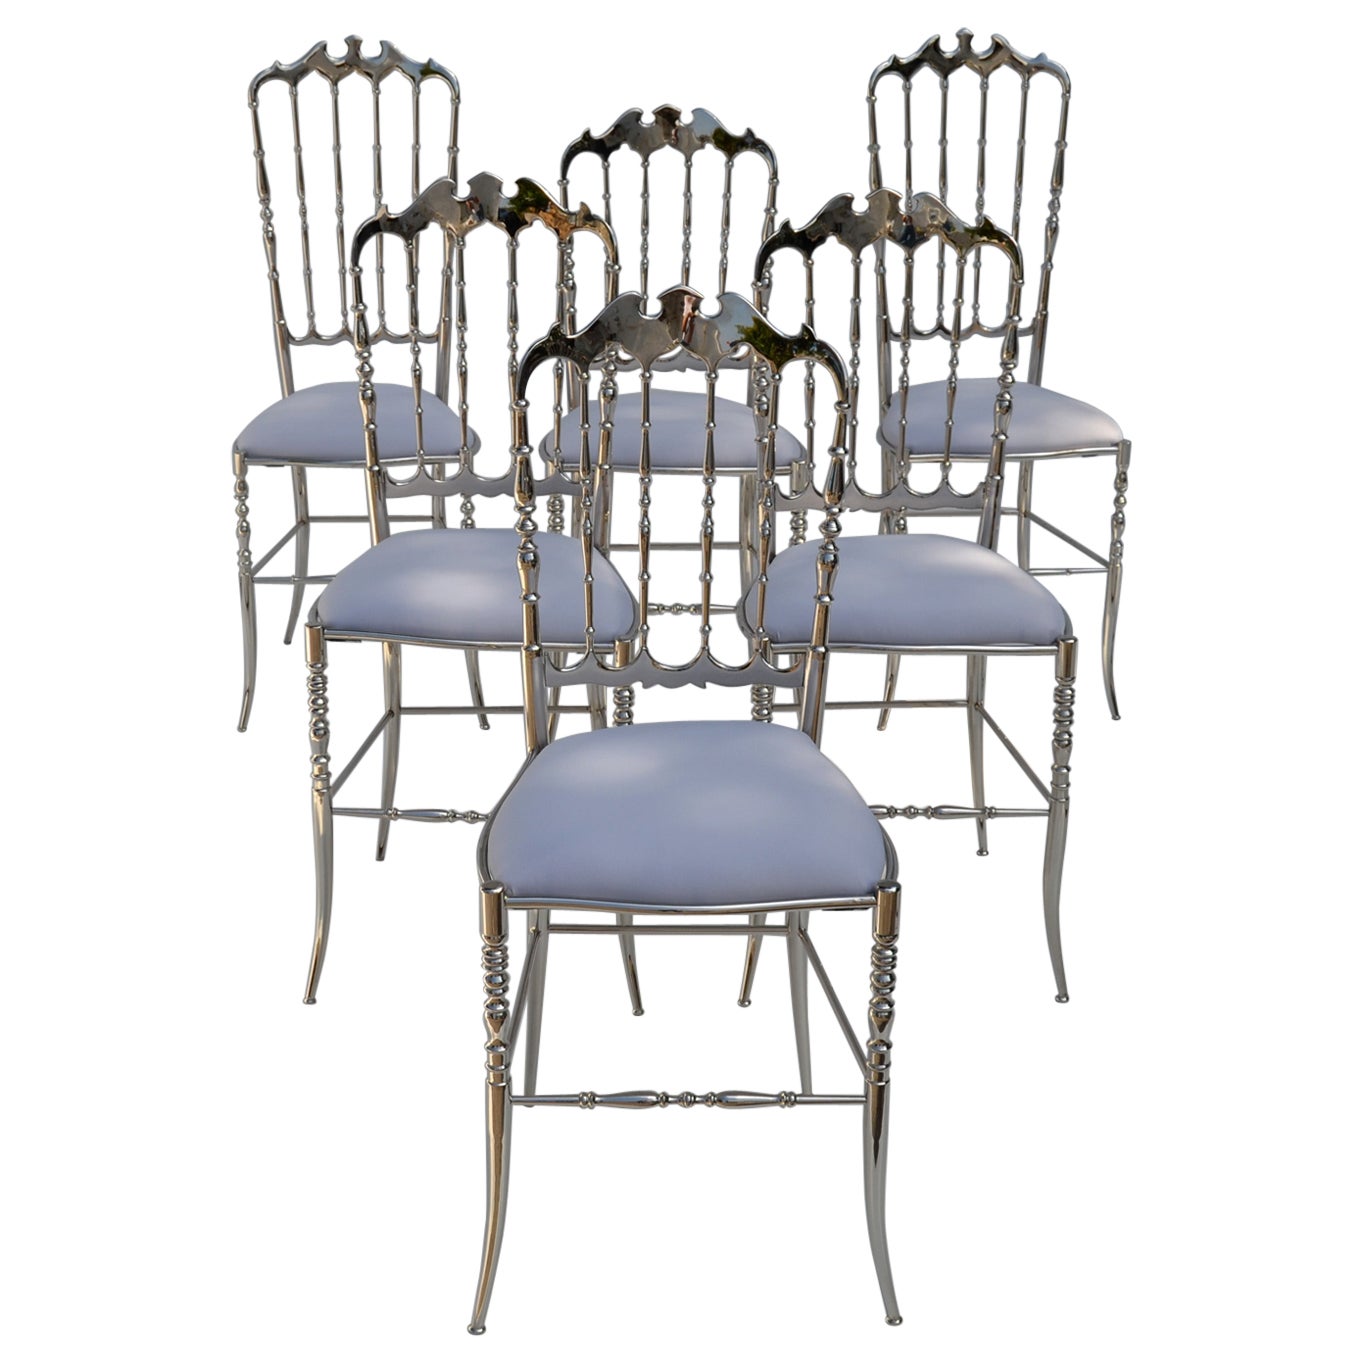 Maison Baccarat Crystal Room Restaurant Style Set of 6 Nickel Plated Chair